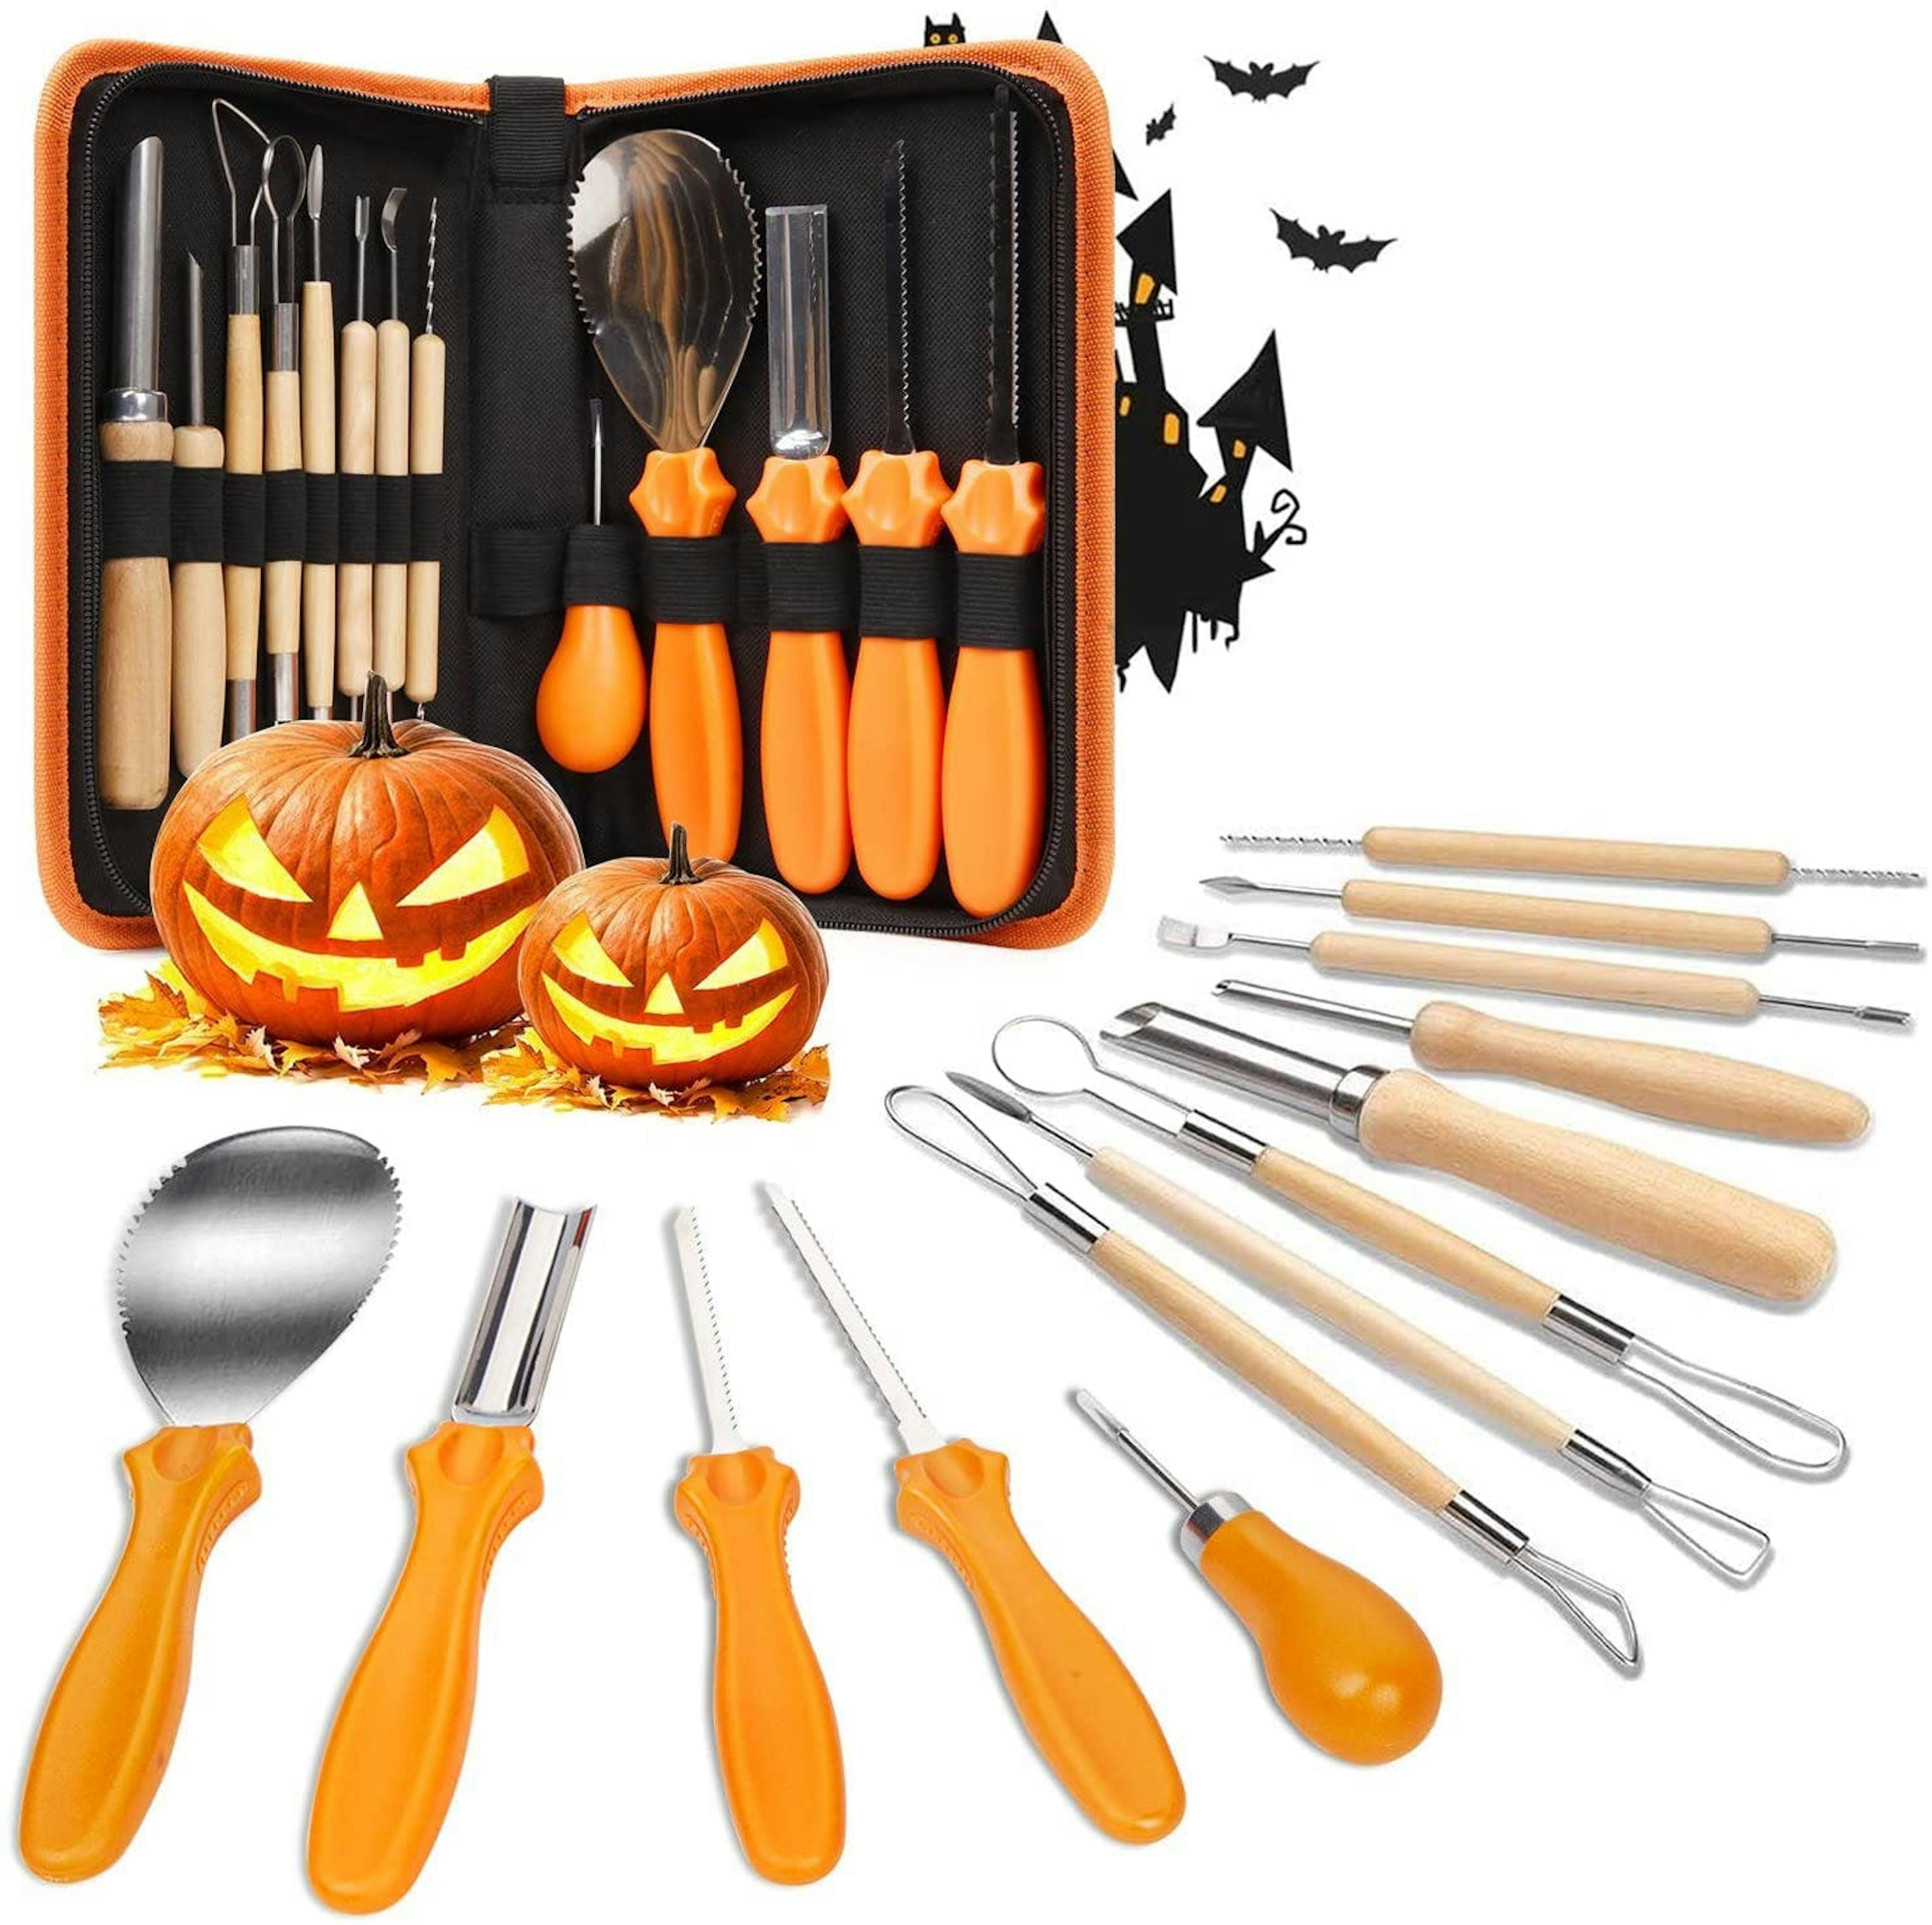 Kitchen tools for Halloween 2020